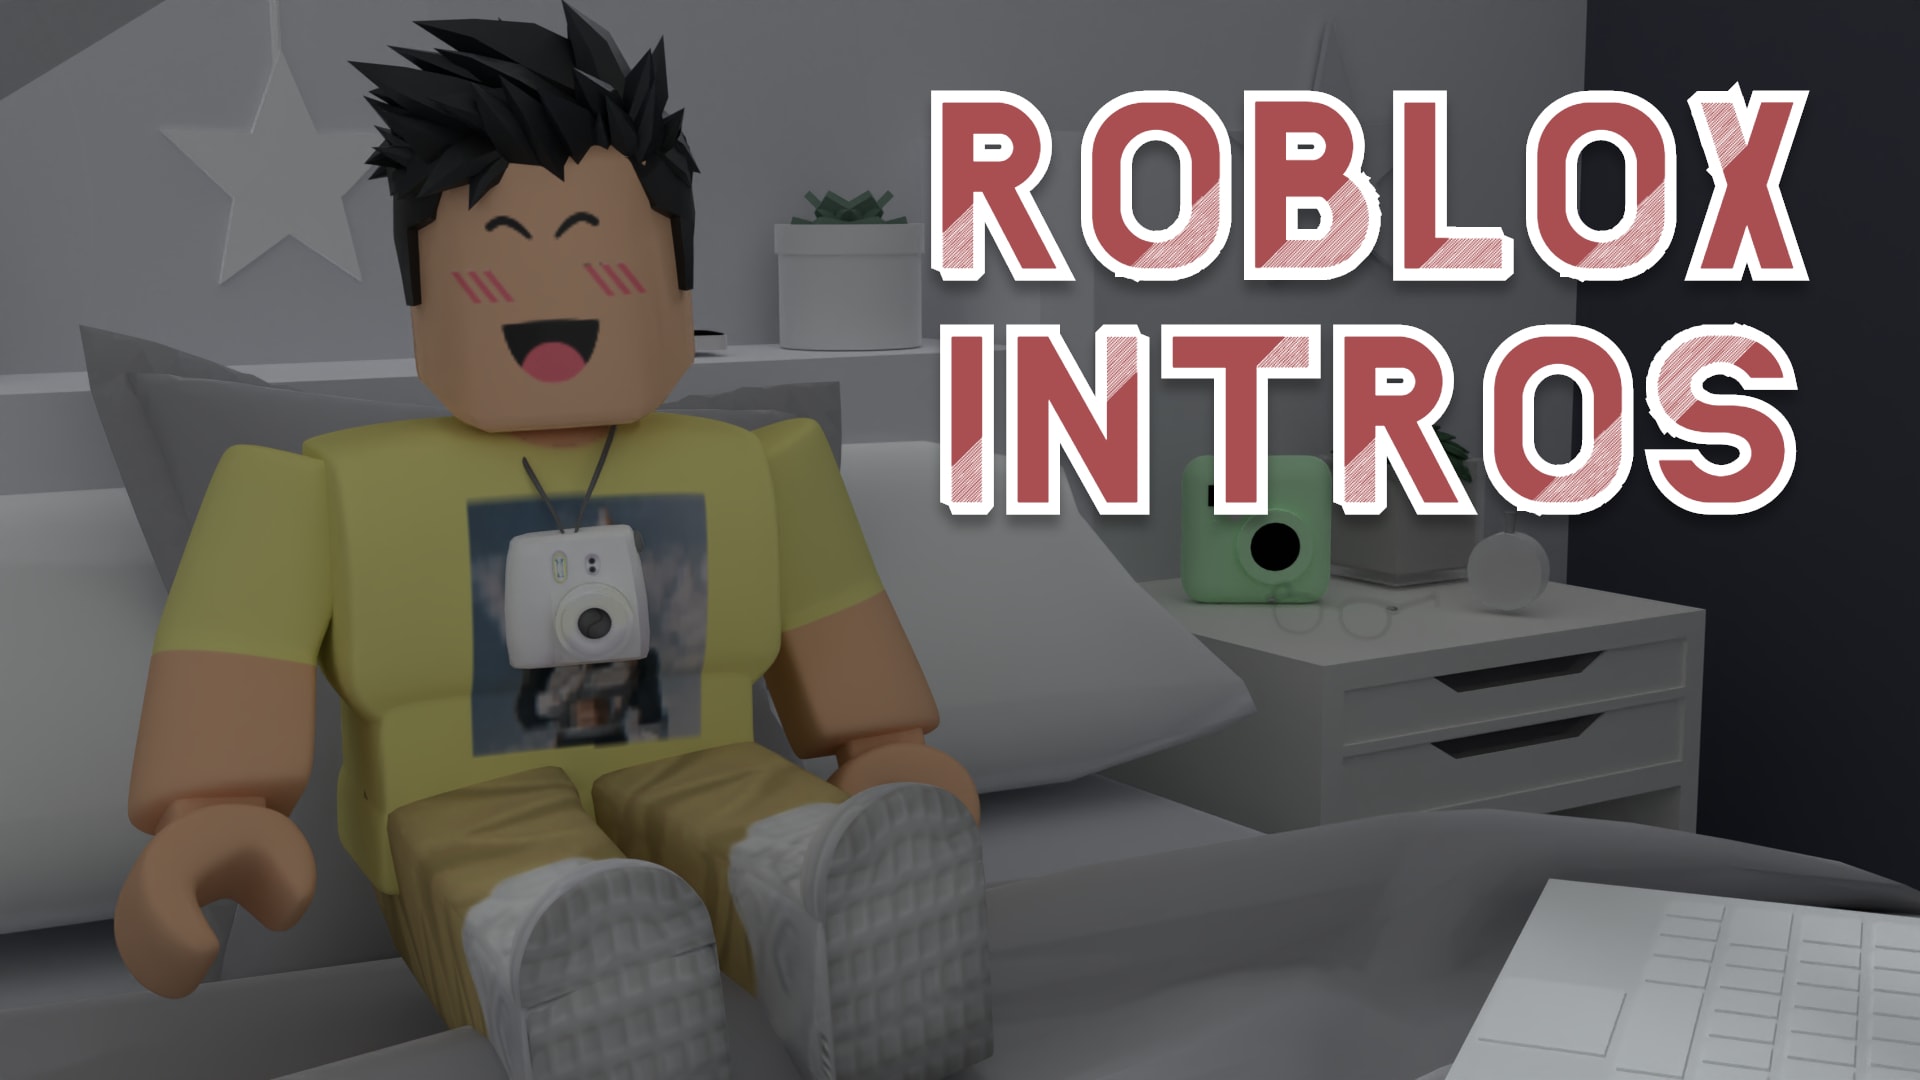 Create A Roblox Animated Intro For Your Yt Channel By Mcs Roblox Fiverr - roblox intro background